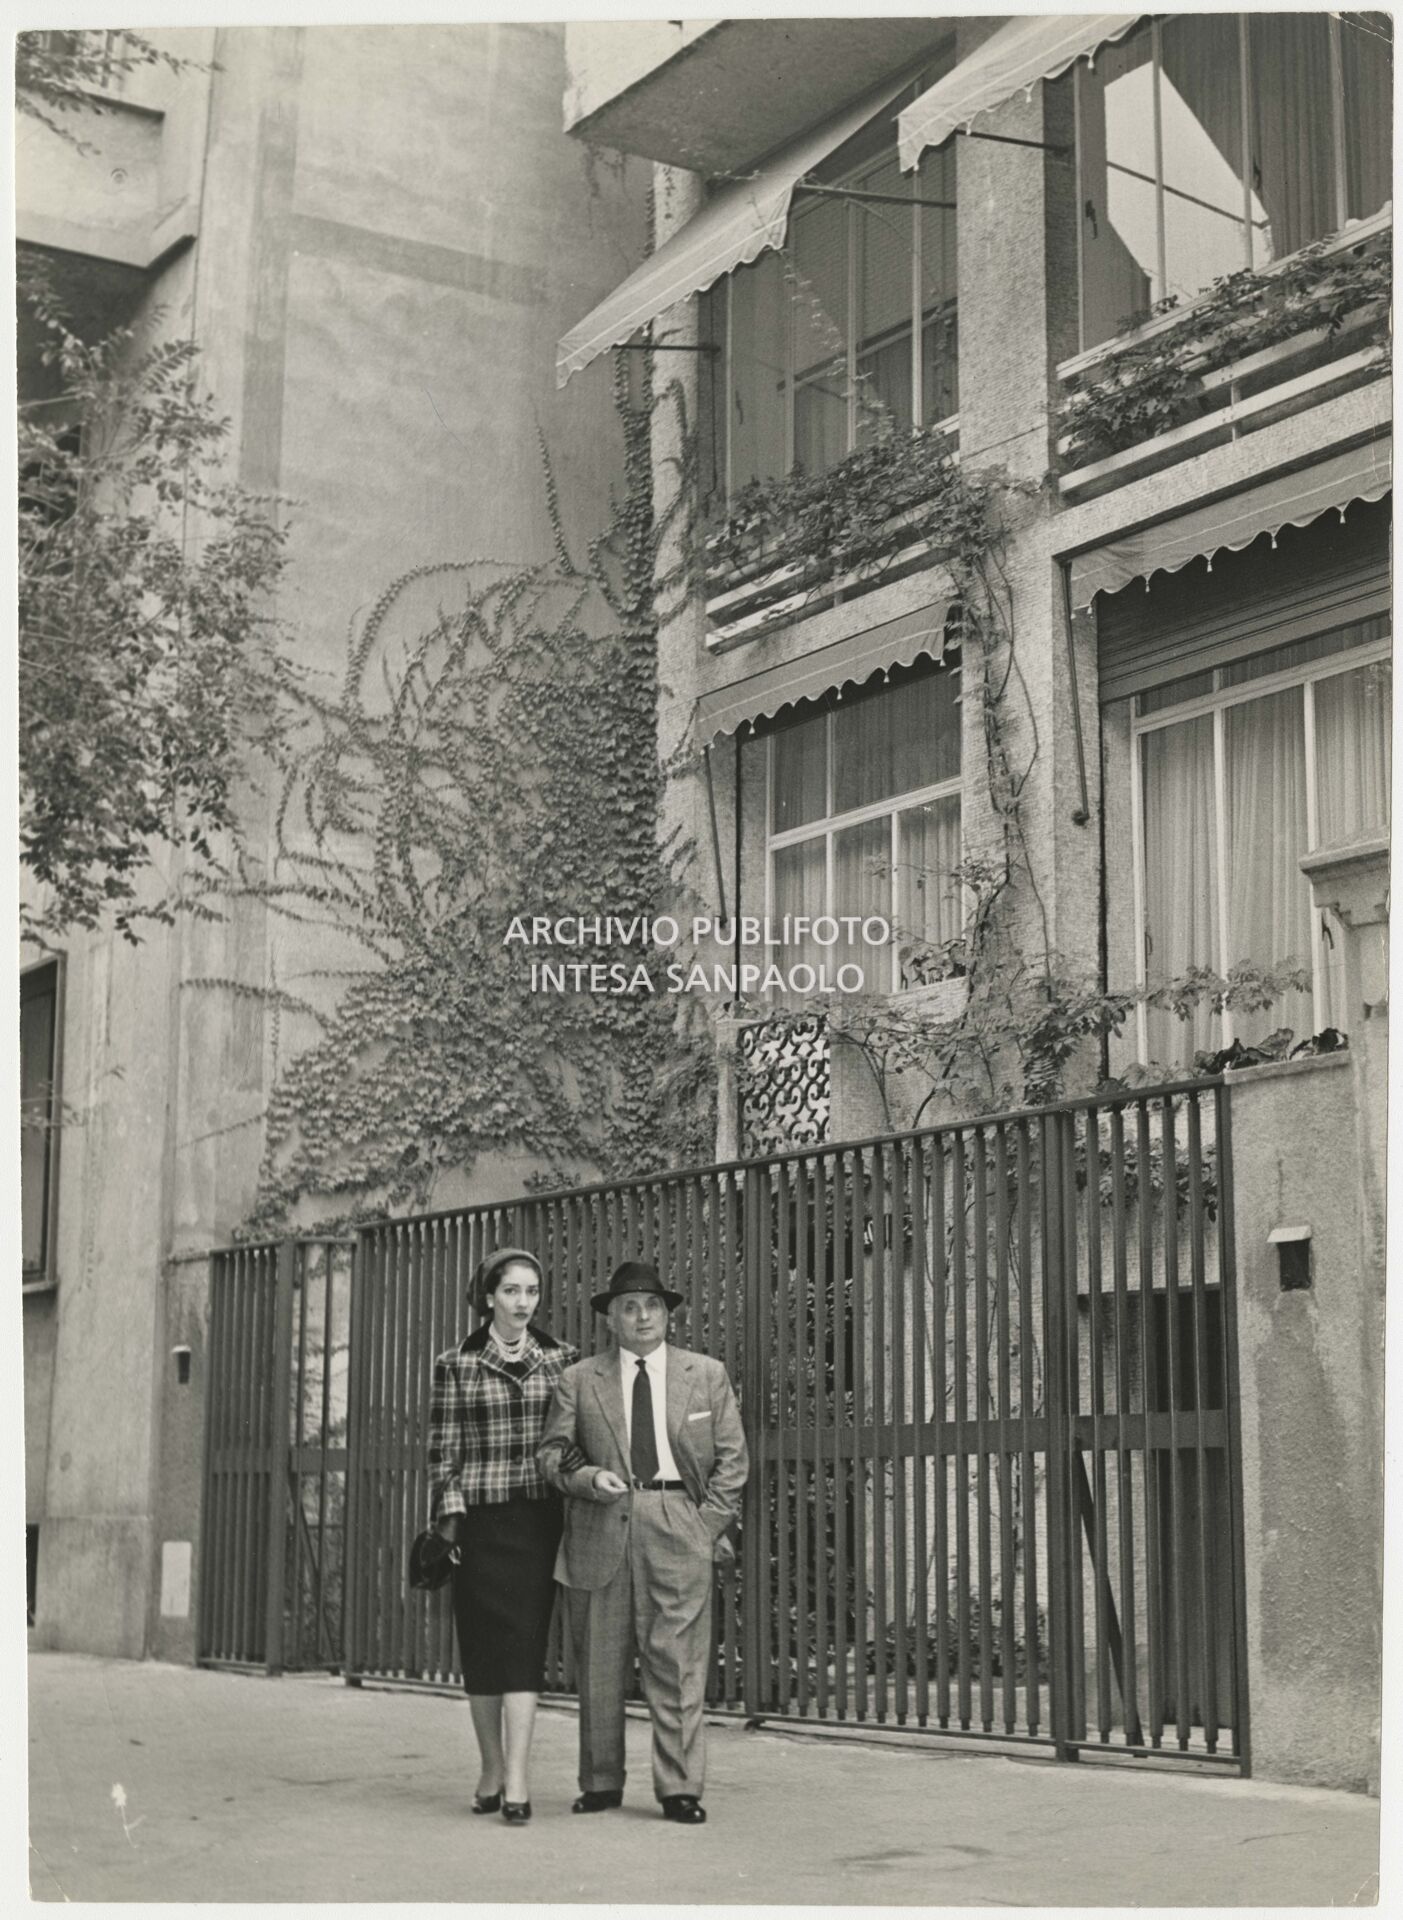 Maria Callas with her husband in front of their house in Milan